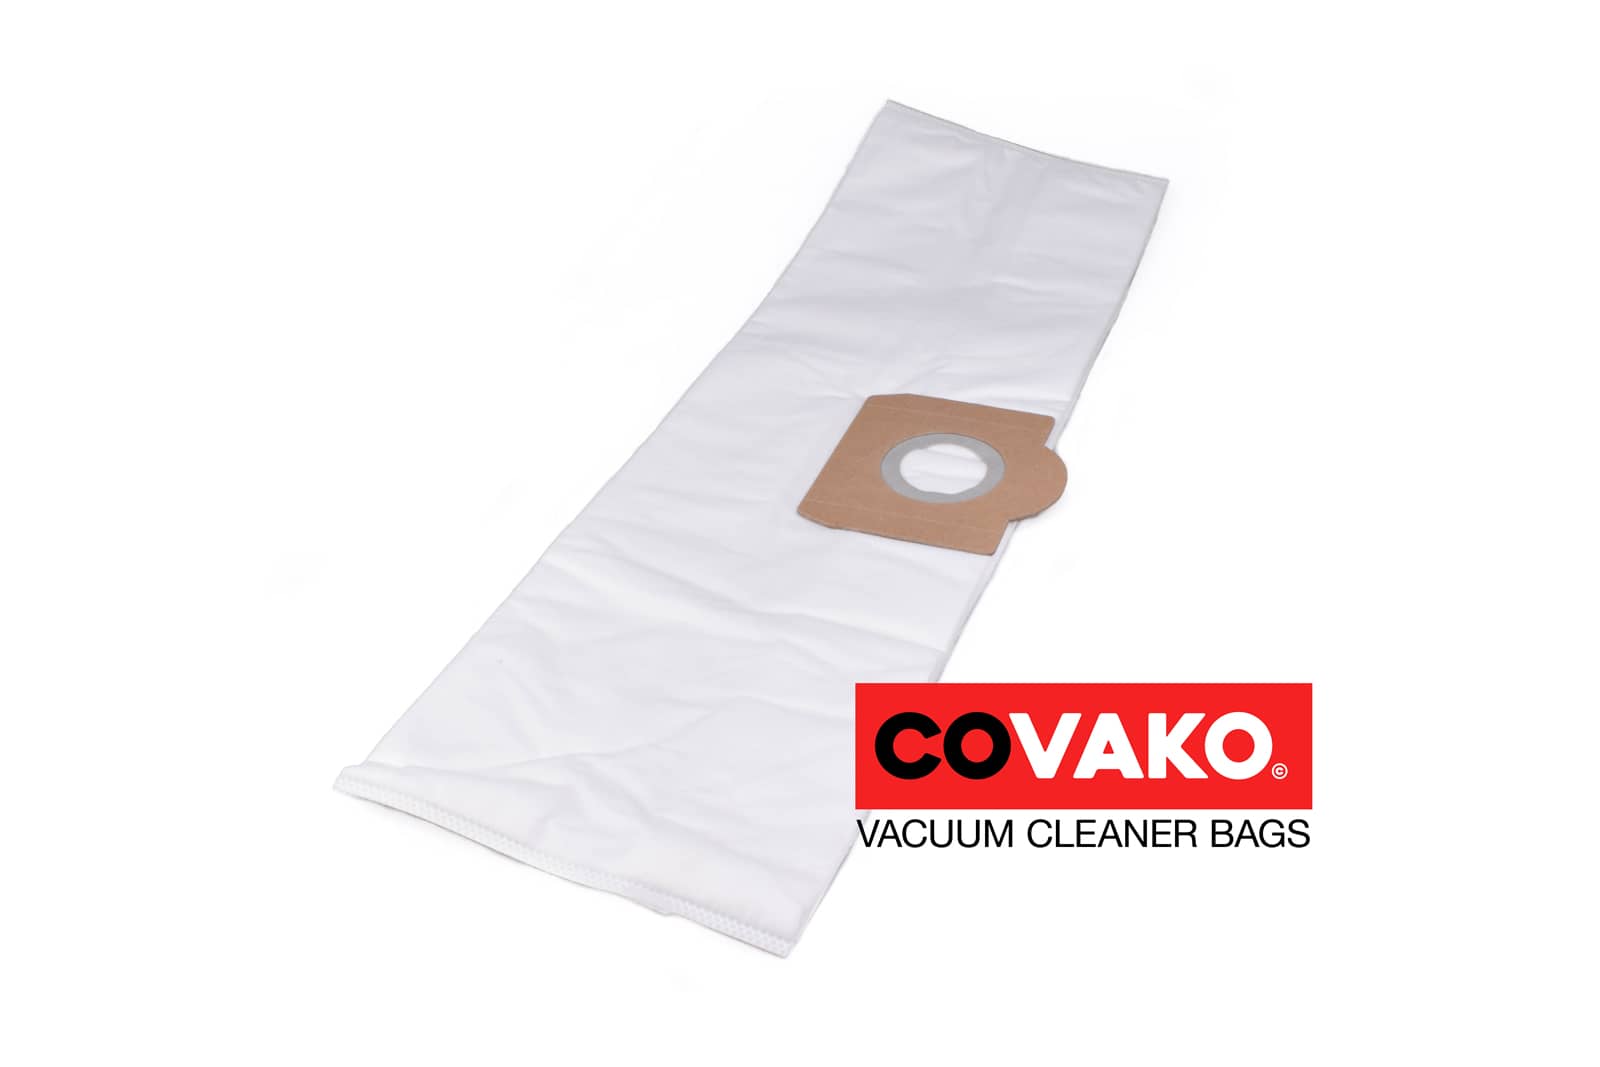 Nilco WS 50 / Synthesis - Nilco vacuum cleaner bags